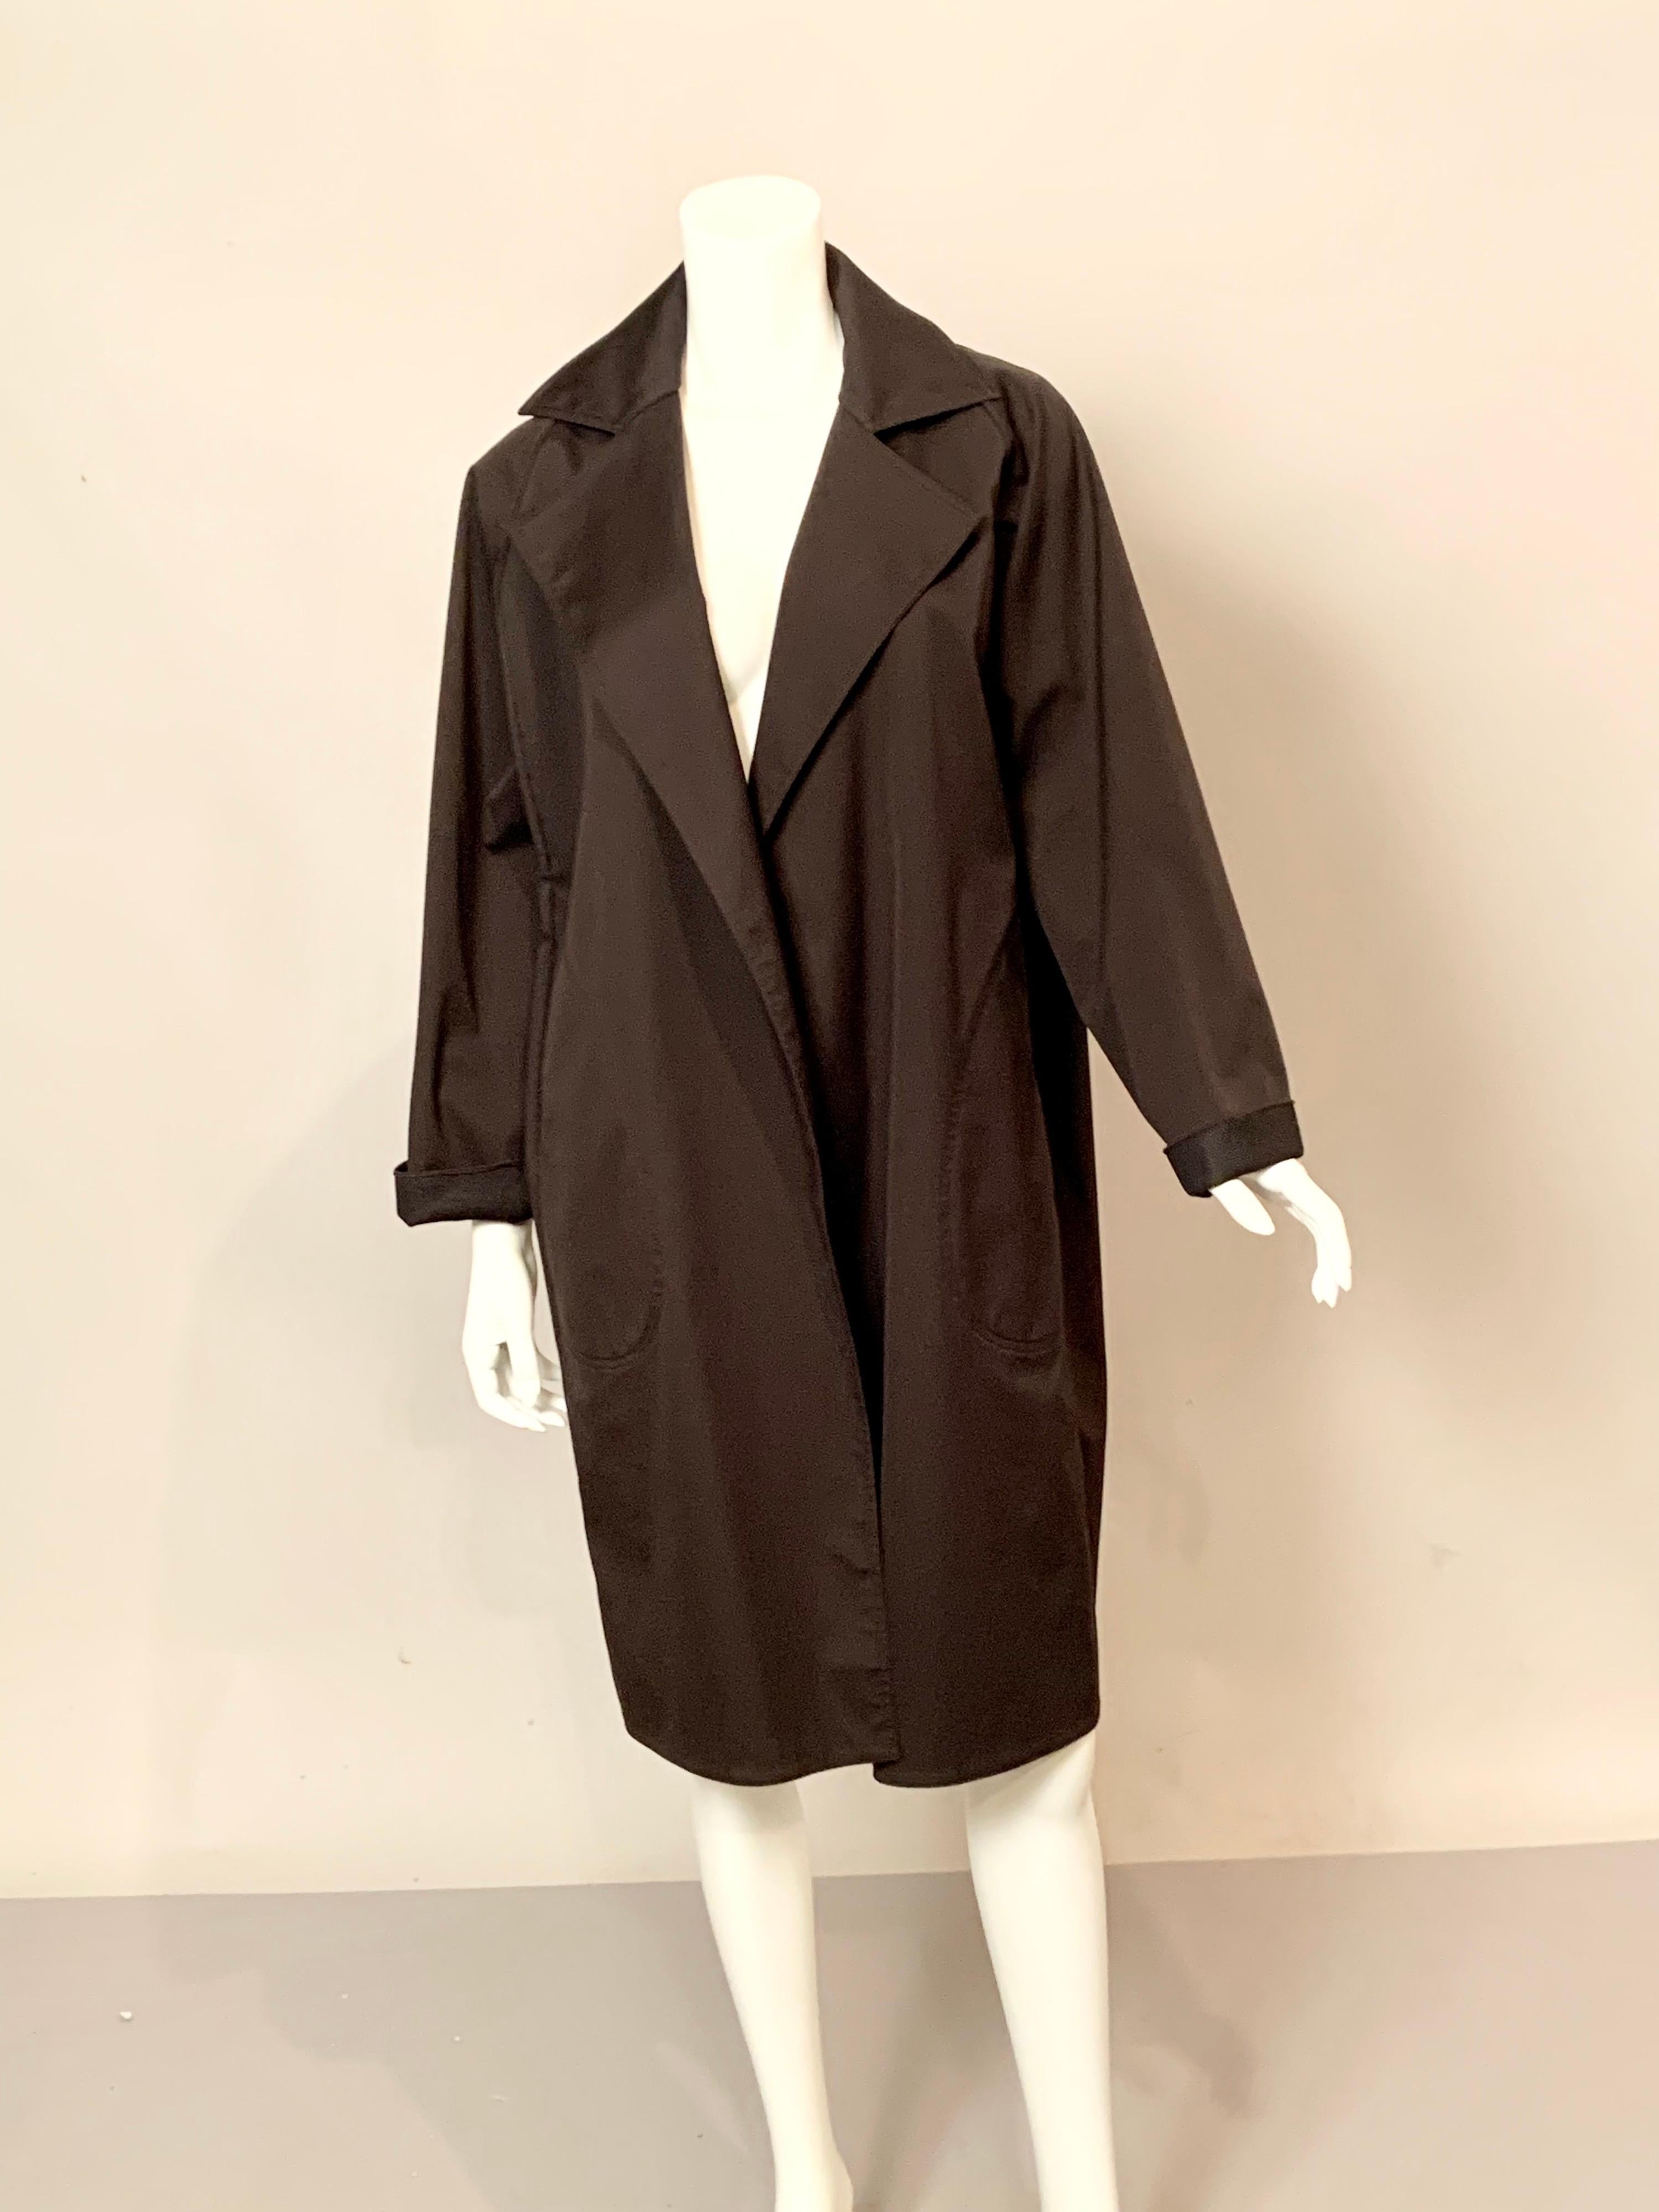 Ronaldus Shamask has designed the perfect raincoat, light enough for a Spring shower and roomy enough to layer for a winter downpour.  The coat is spare of decoration with two generous pockets in the shape of raindrops.  The coat is in excellent